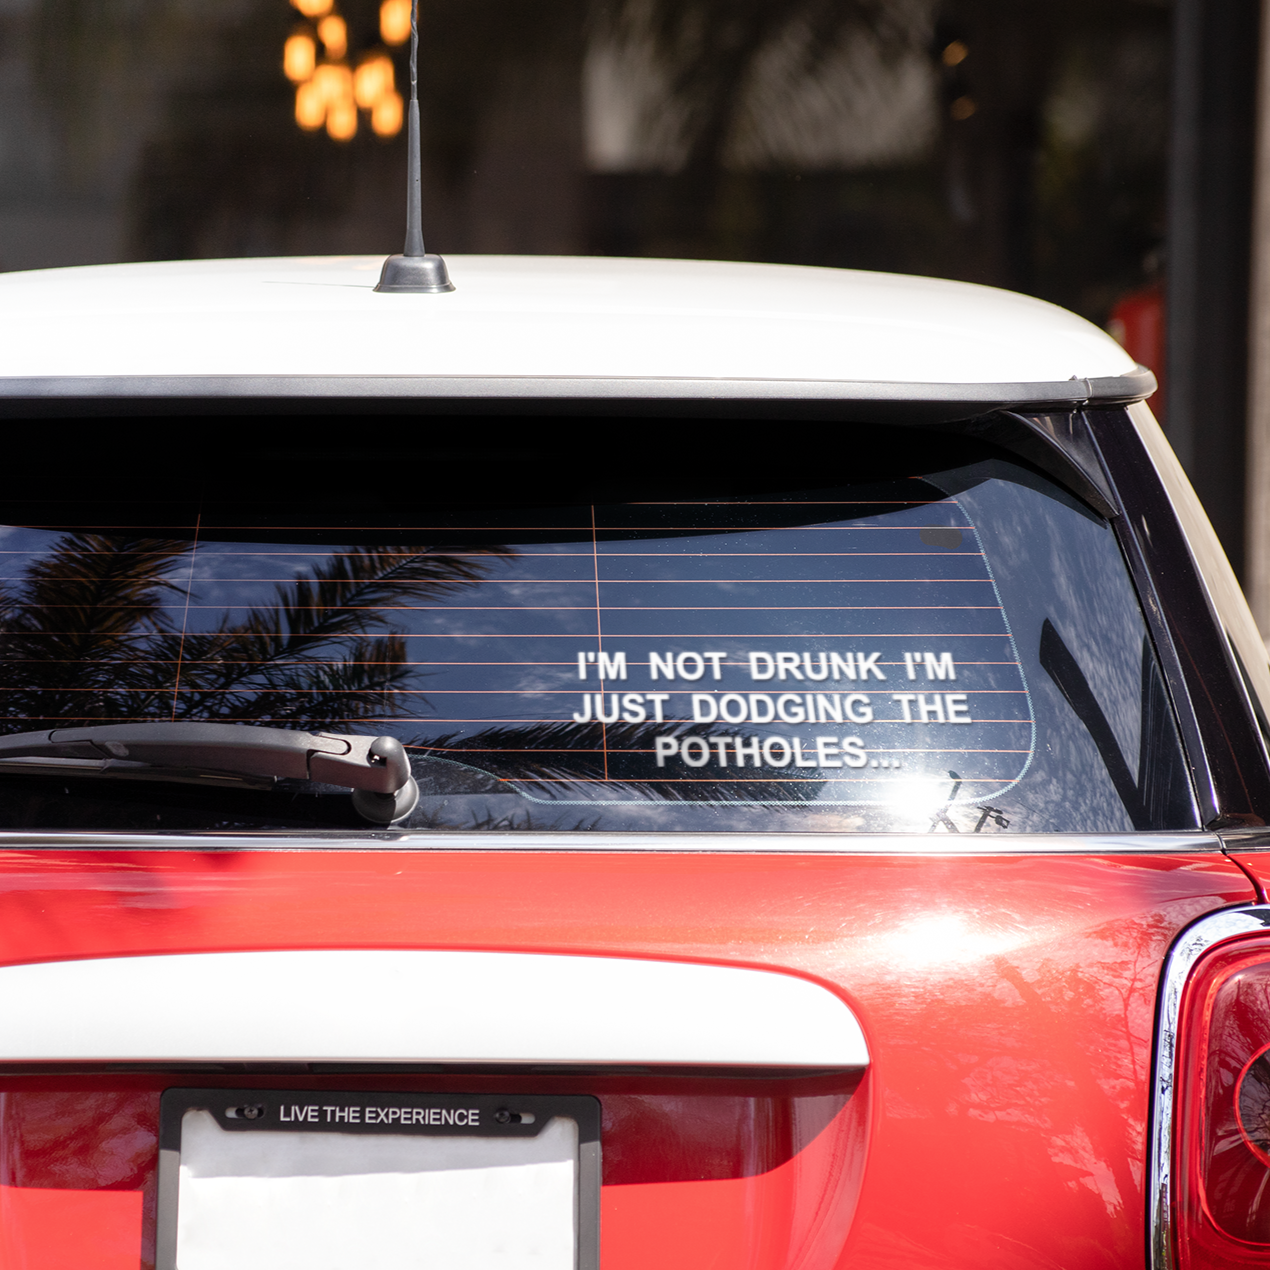 I'm not drunk I'm just dodging the potholes - decal